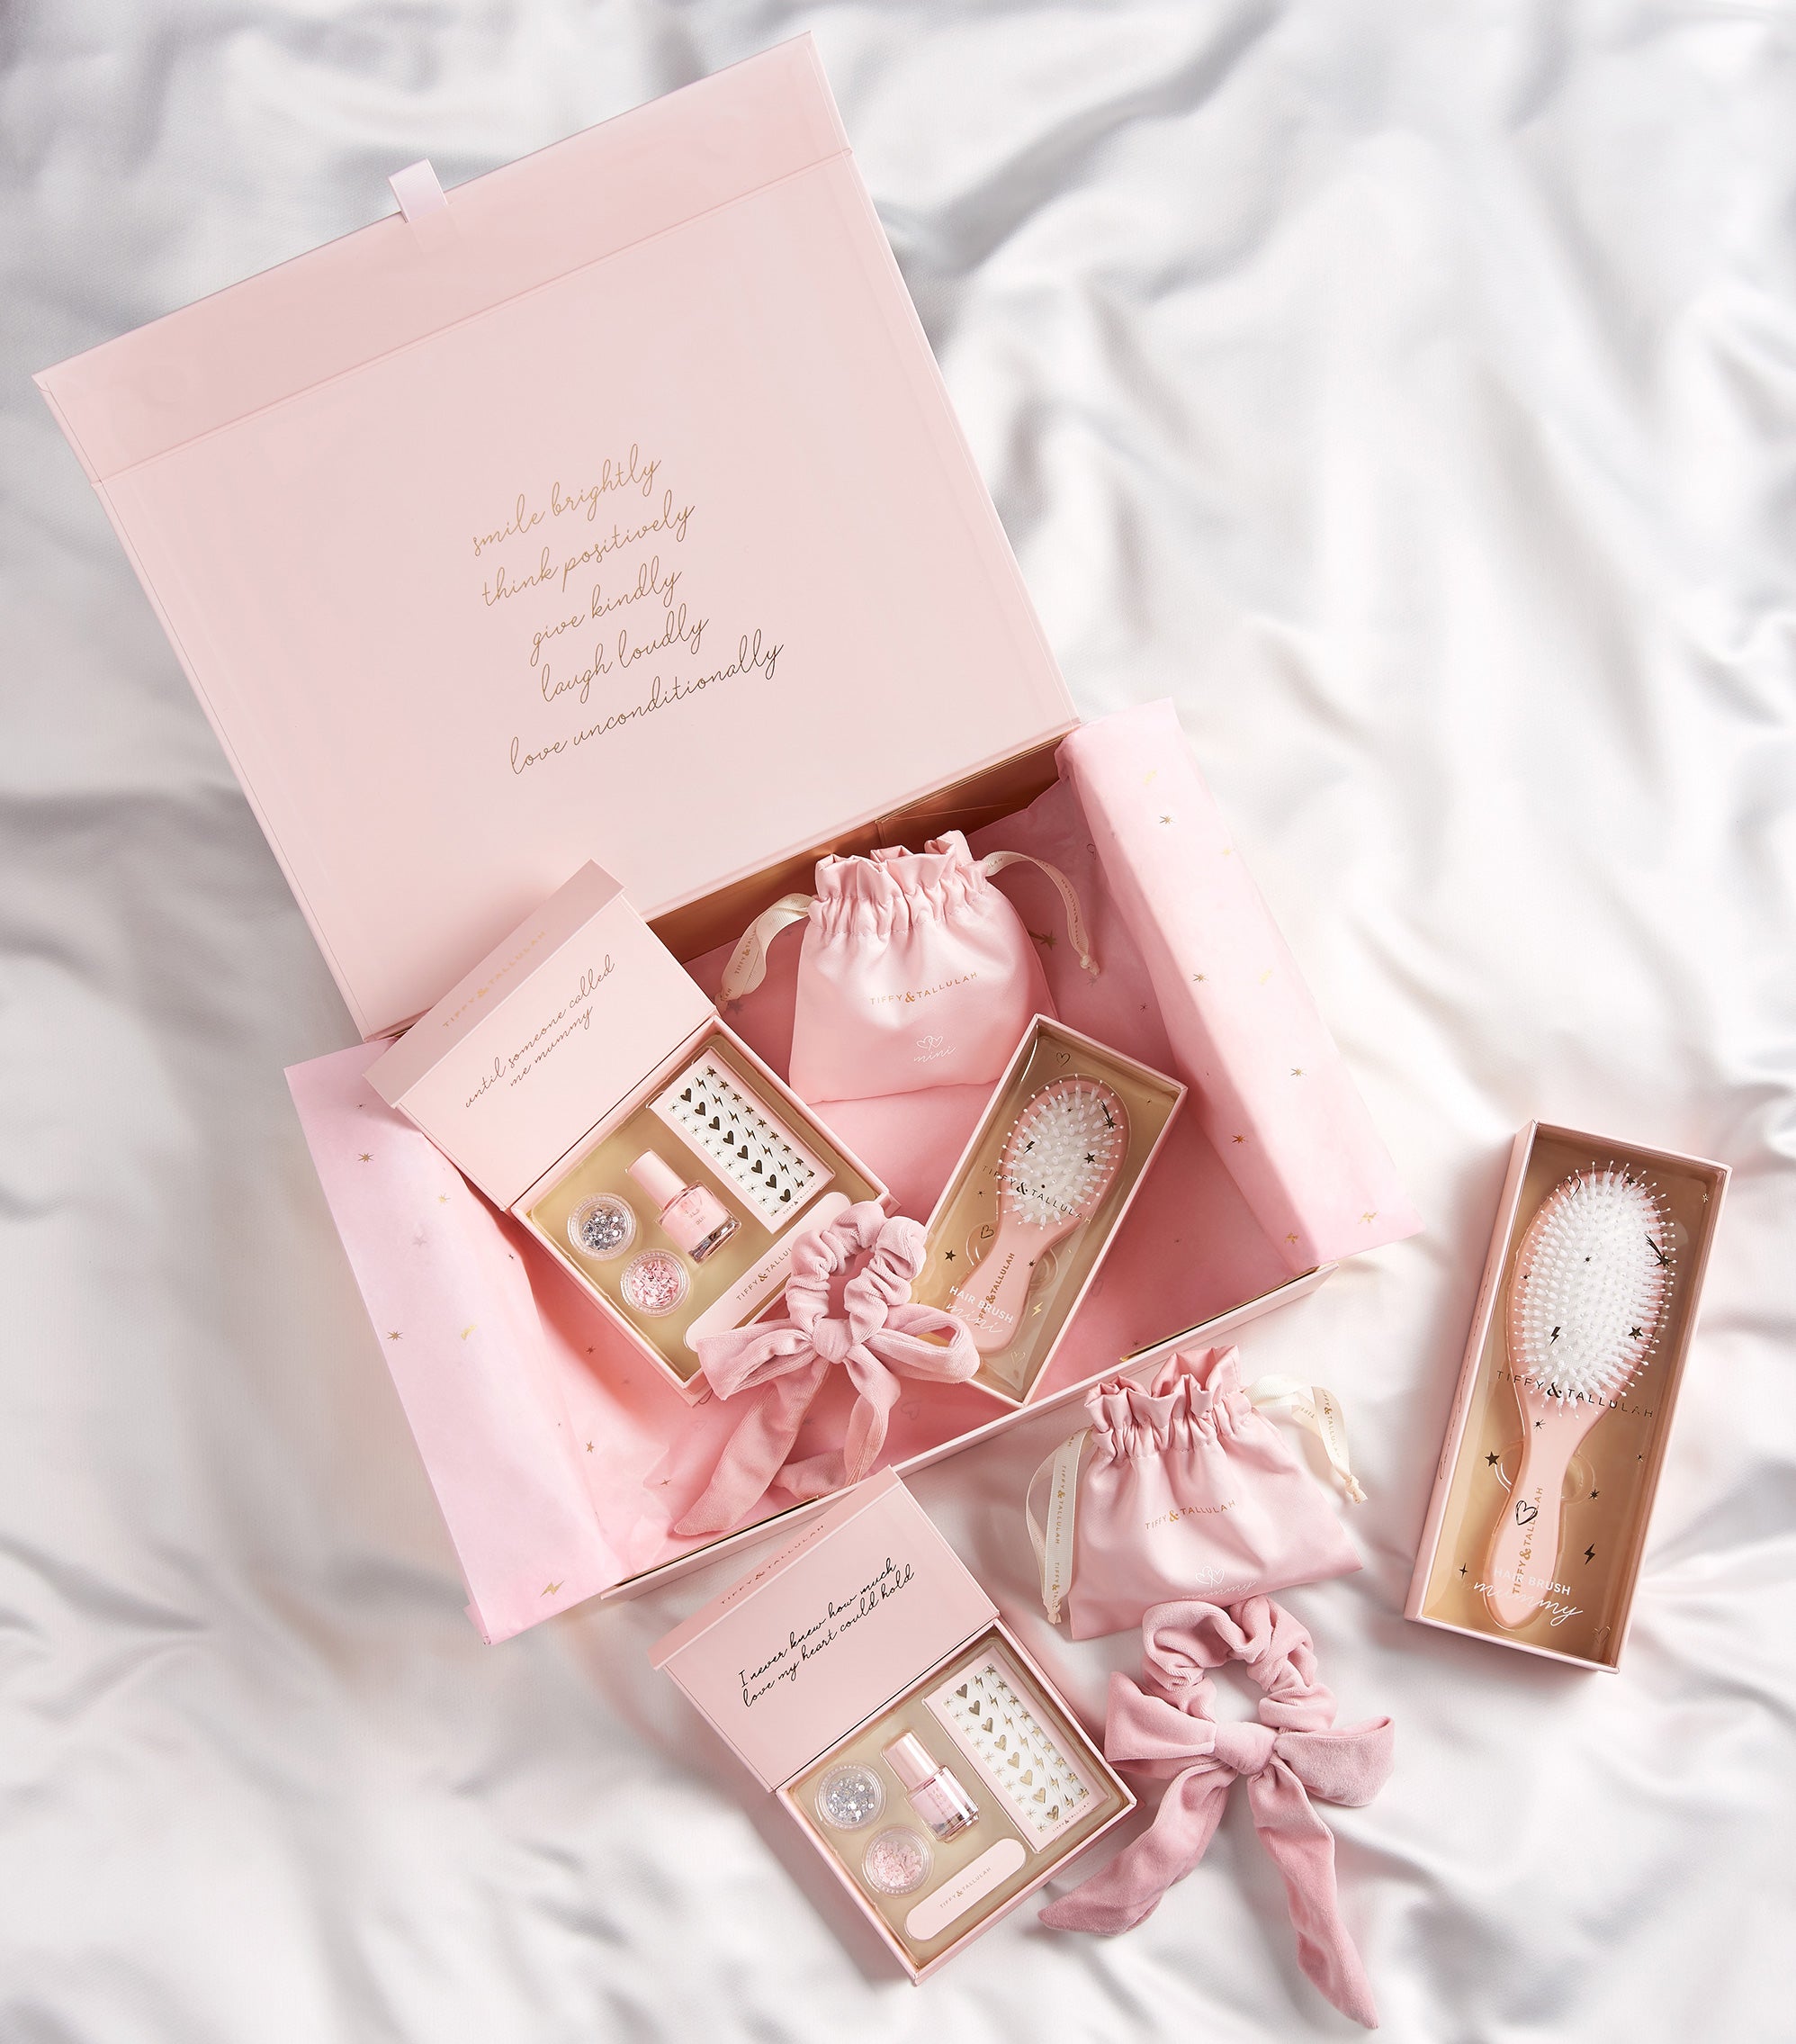 Tiffy & Tallulah | Luxurious Beauty Gifting for Mummies & Minis